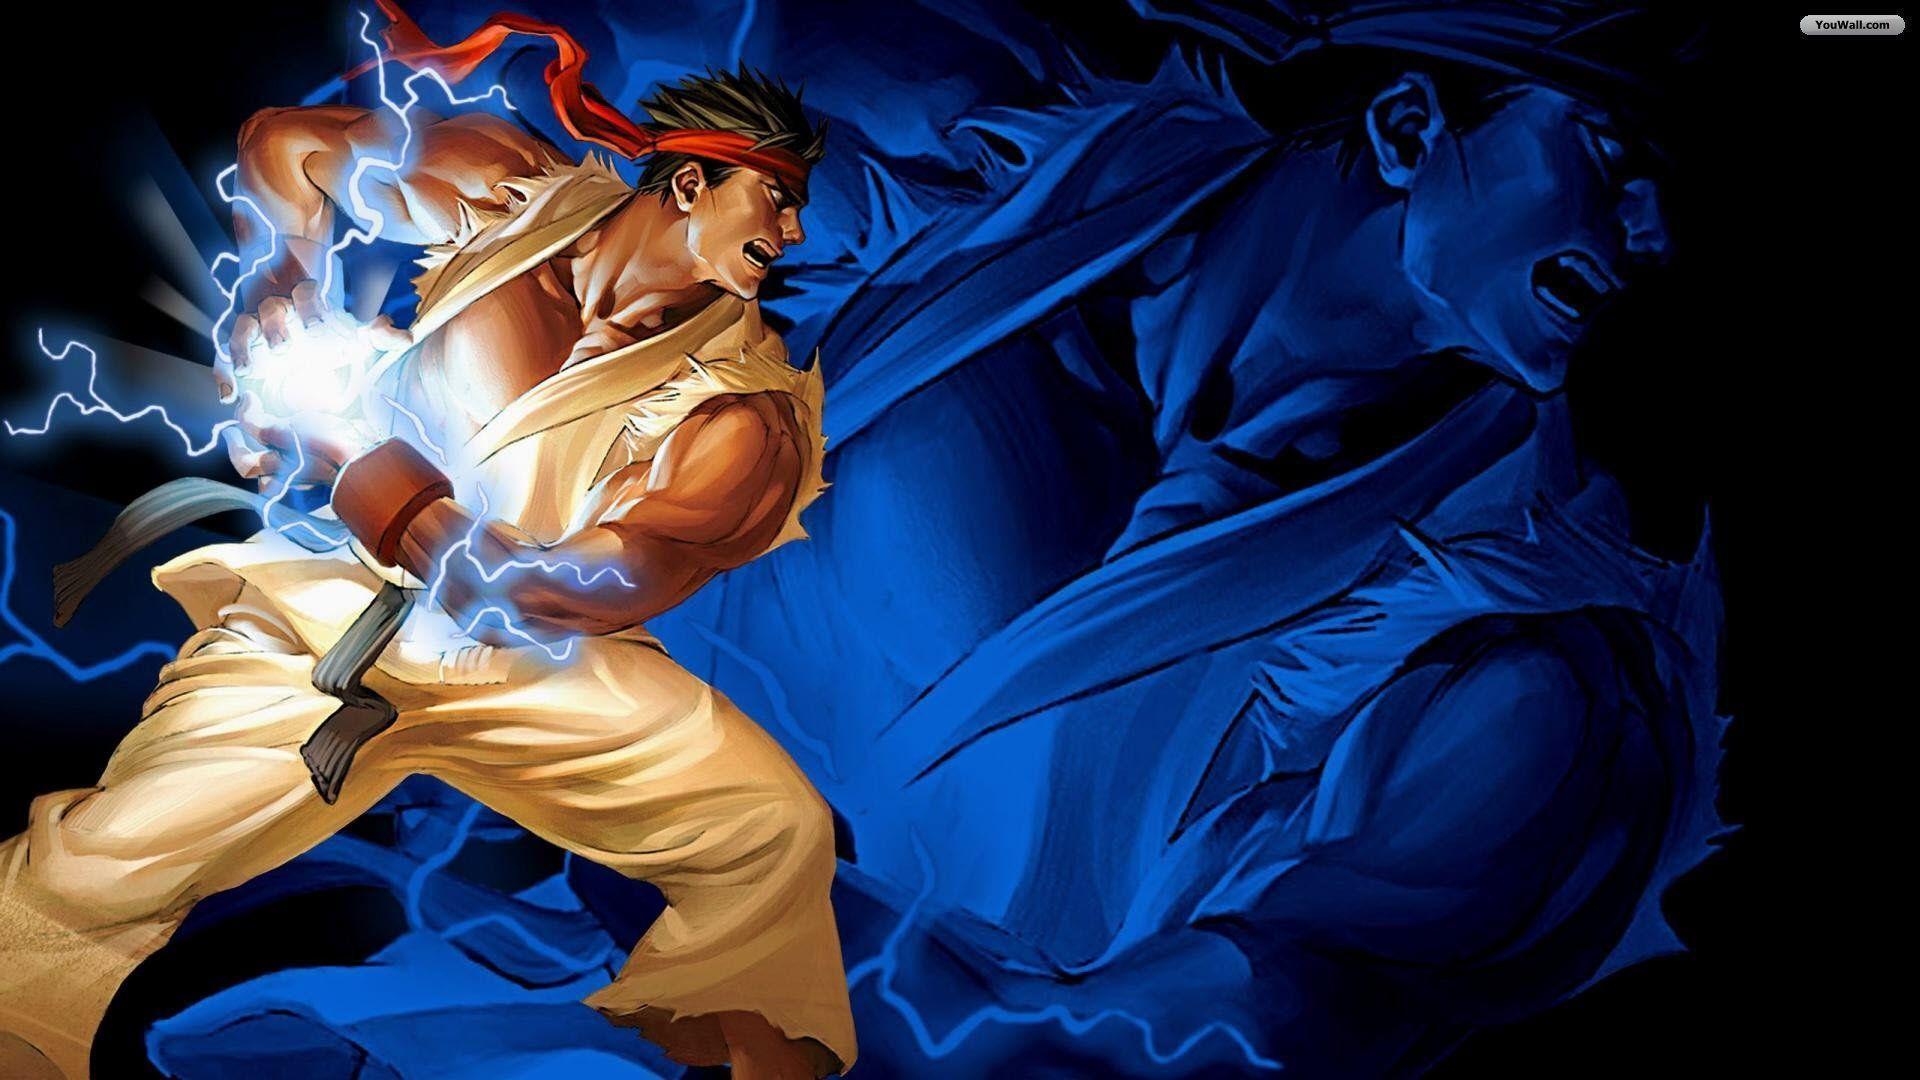 image For > Ryu Street Fighter Wallpaper